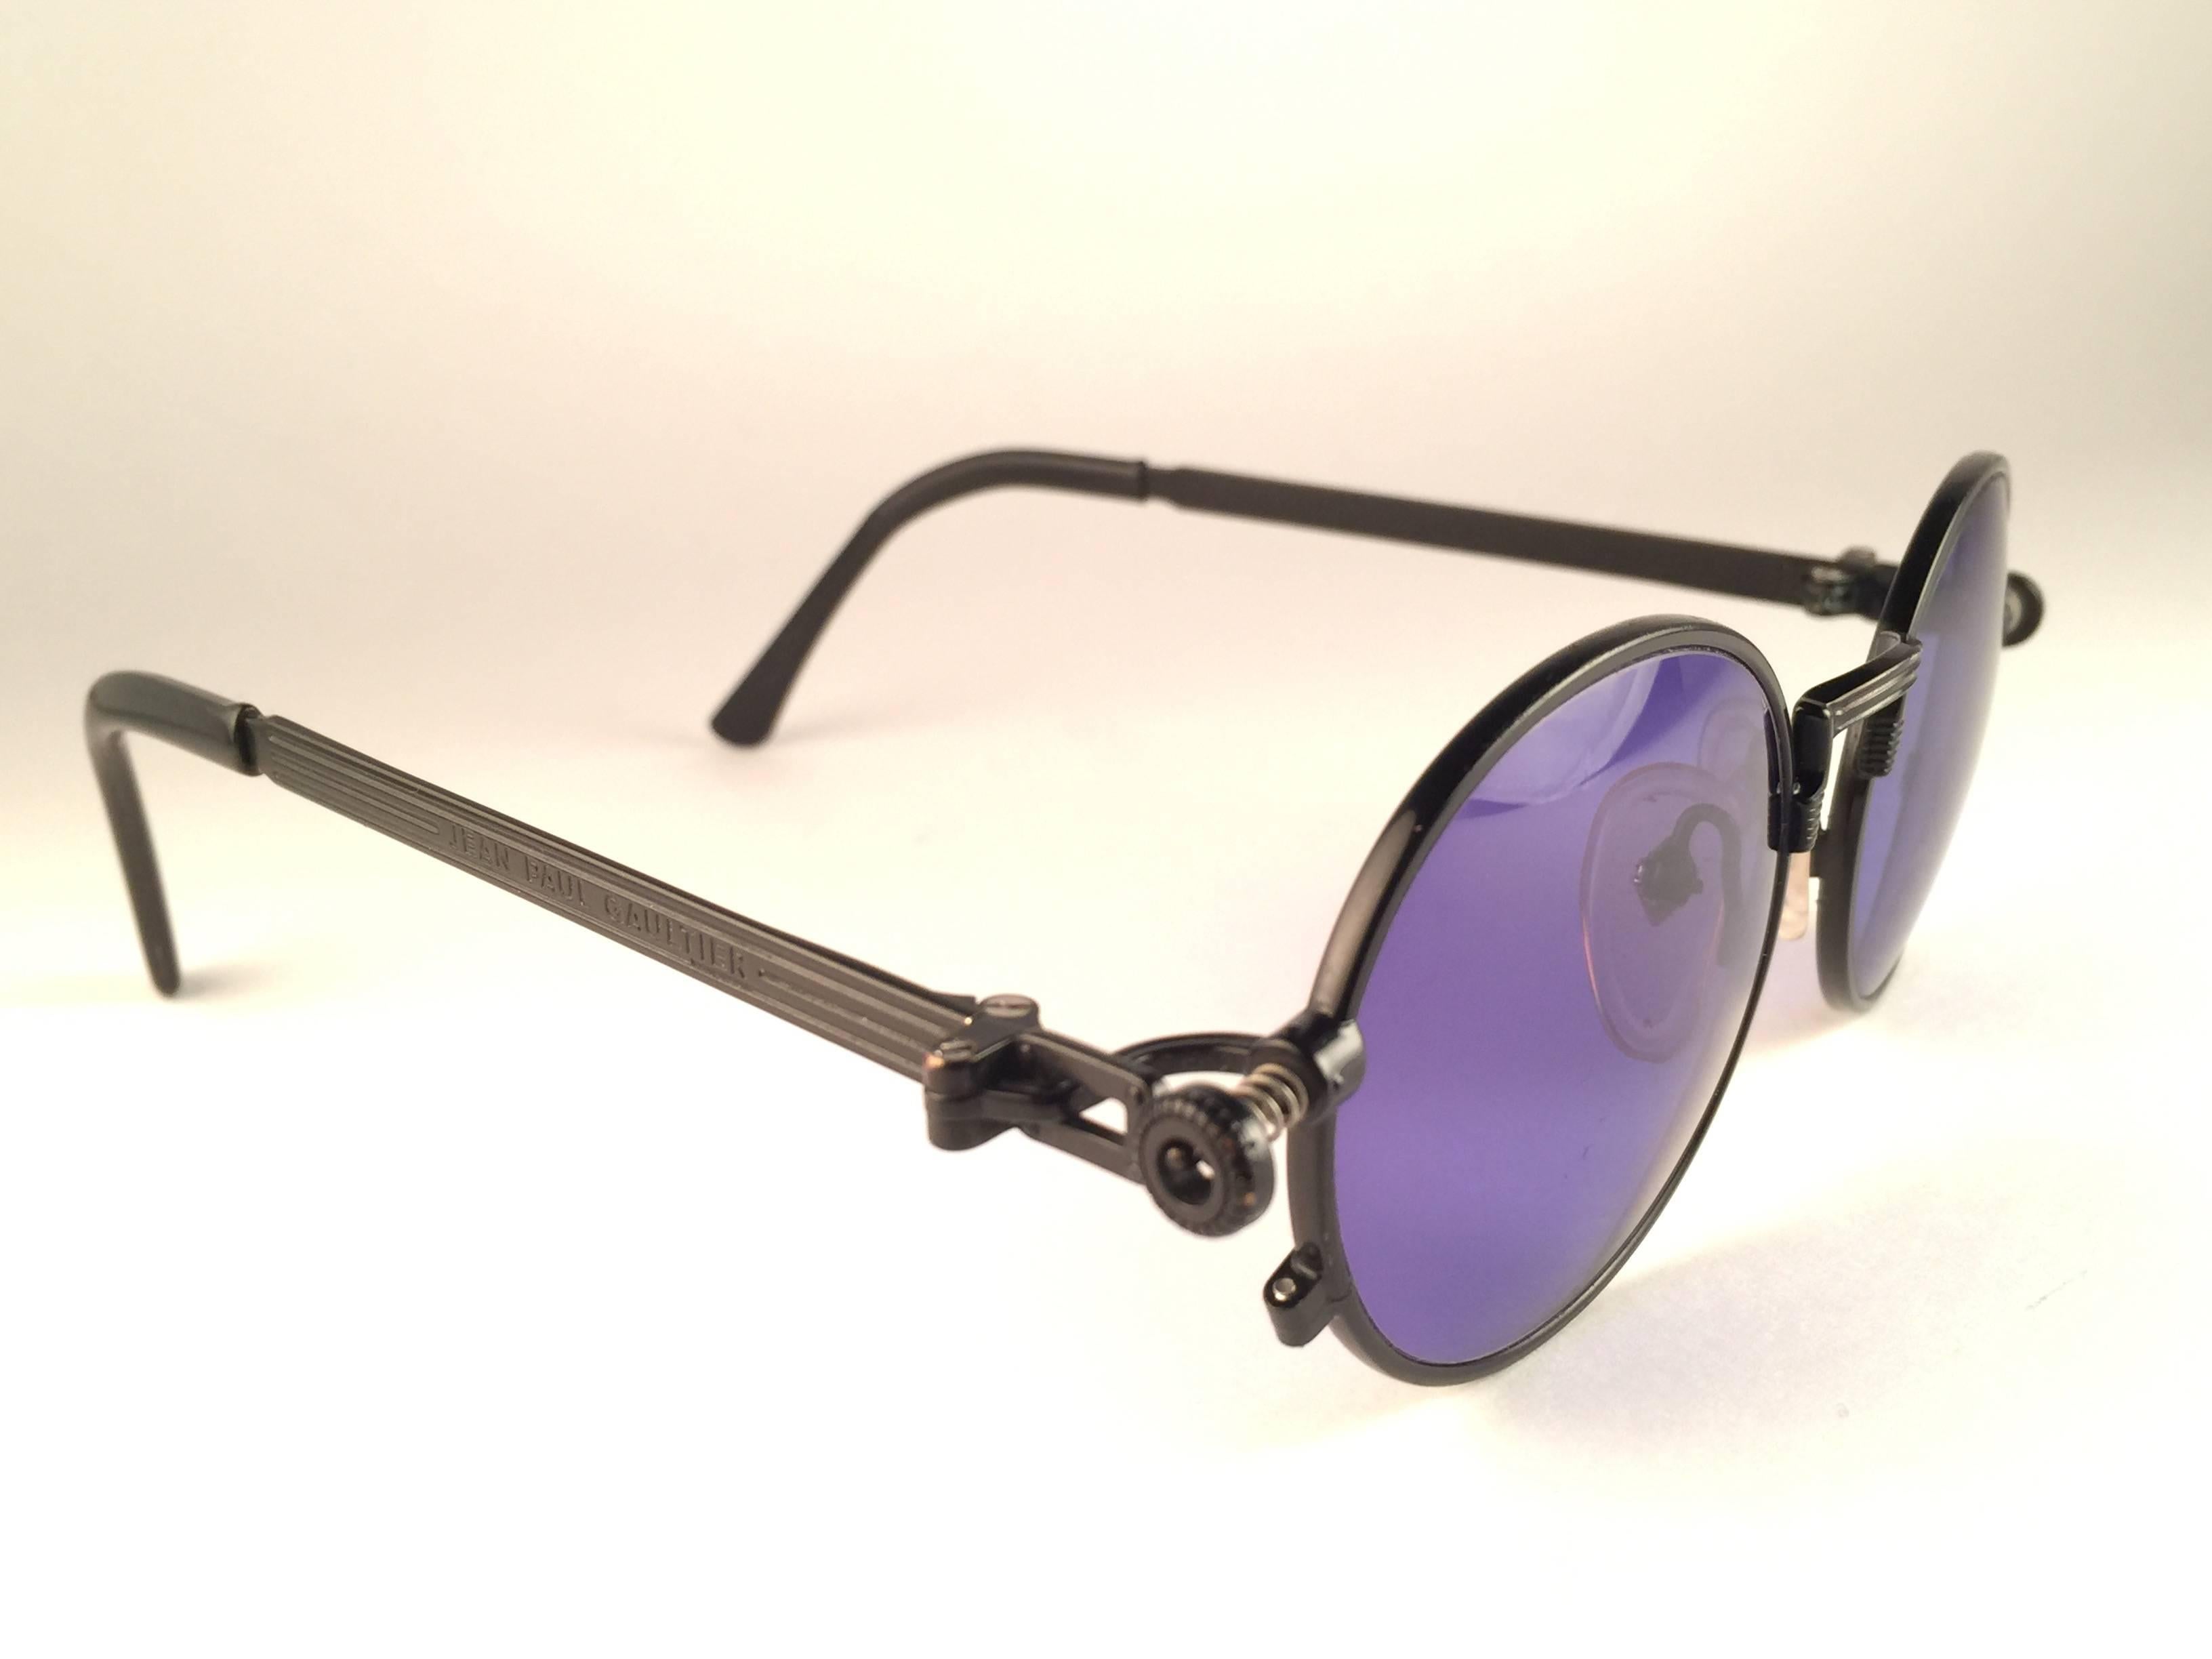 New Jean Paul Gaultier 56 4178 round black matte frame.  
Flat dark purple lenses that complete a ready to wear JPG look.  
Amazing design with strong yet intricate details. 
Design and produced in the 1990's. New, never worn or displayed.
A true